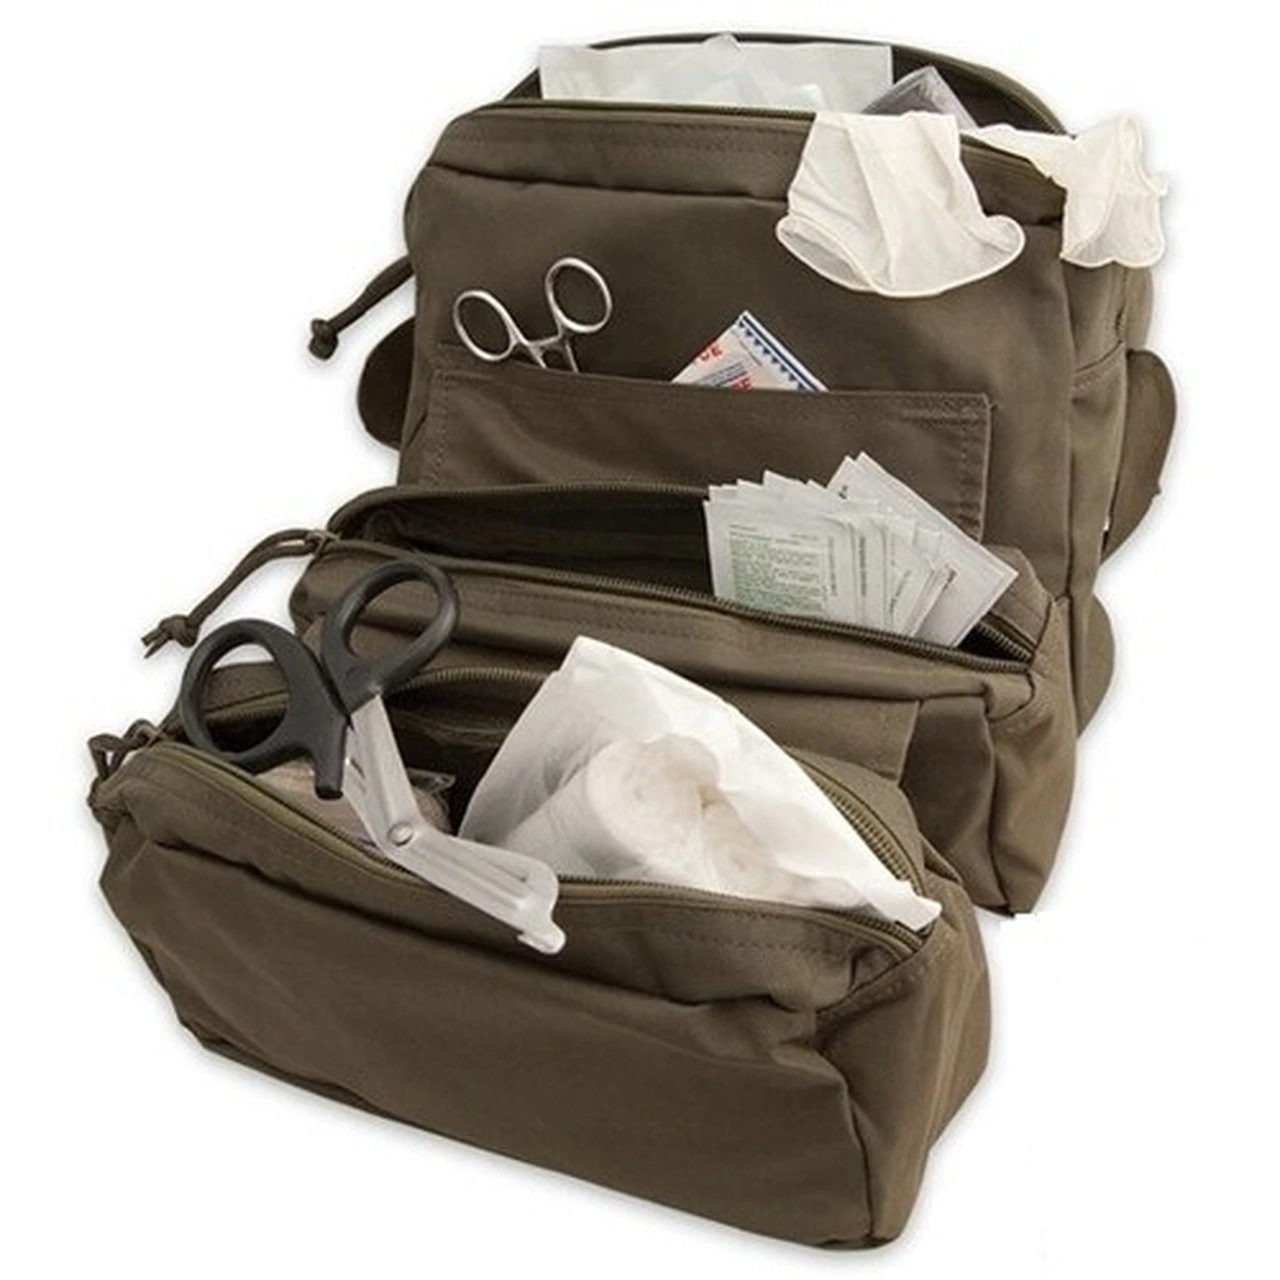 First Aid M-3 Medic Bag Open